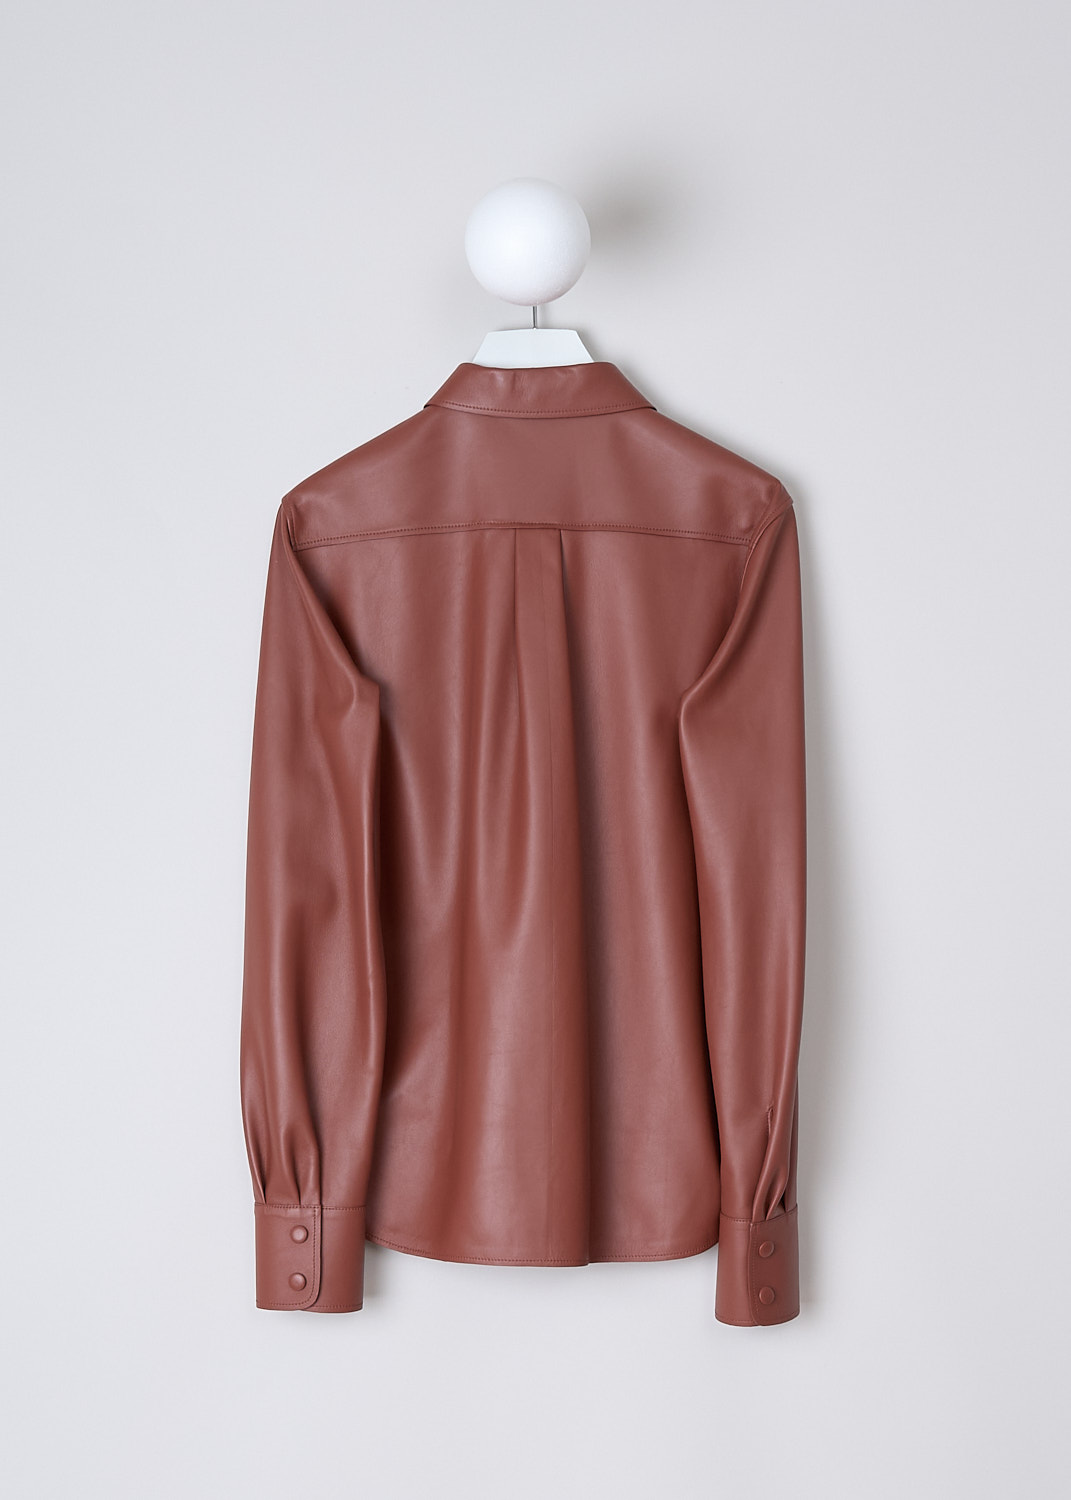 CHLOÉ, LEATHER BLOUSE IN INTENSE BROWN, CHC22SCH1620826J_INTENSE_BROWN, Brown, Back, The long sleeve leather blouse in Intense Brown has a pointed collar and a front button placket with press studs. The long sleeves have cuffs with a press stud closure. The blouse has a rounded hemline. In the back, a seam runs along the back yoke with a centre box pleat.
